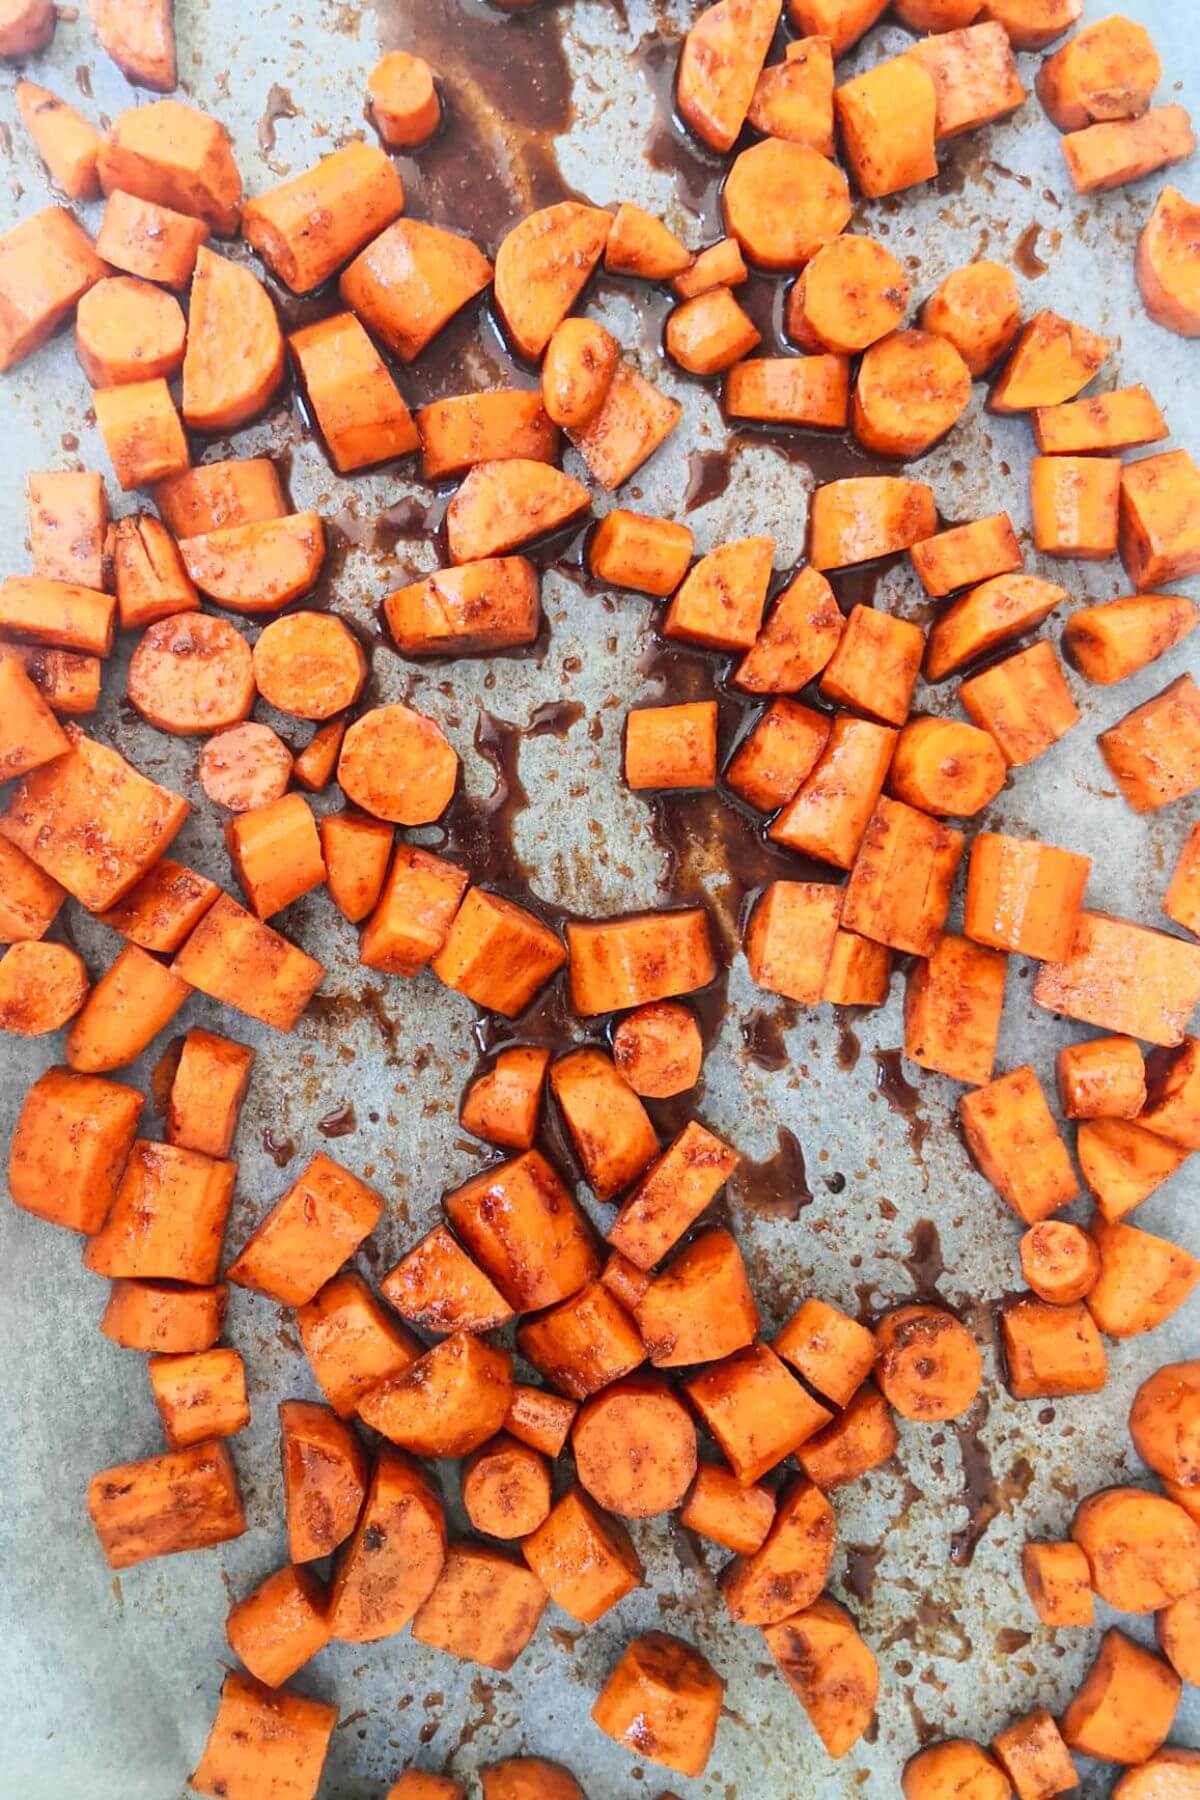 Chopped carrots laid out on a lined oven tray.